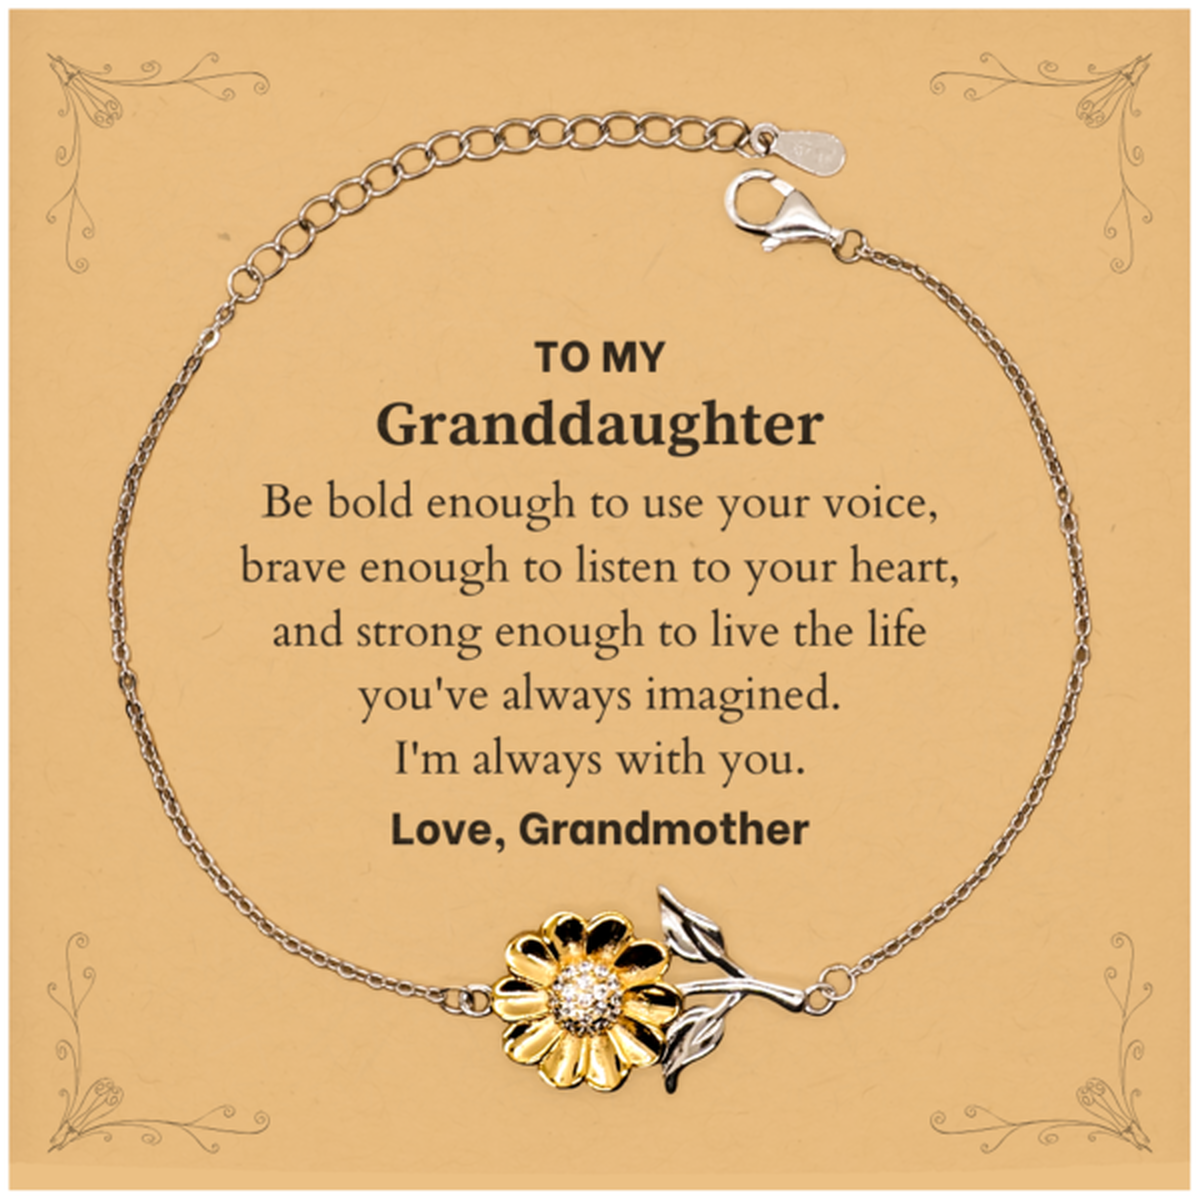 Keepsake Granddaughter Sunflower Bracelet Gift Idea Graduation Christmas Birthday Granddaughter from Grandmother, Granddaughter Be bold enough to use your voice, brave enough to listen to your heart. Love, Grandmother